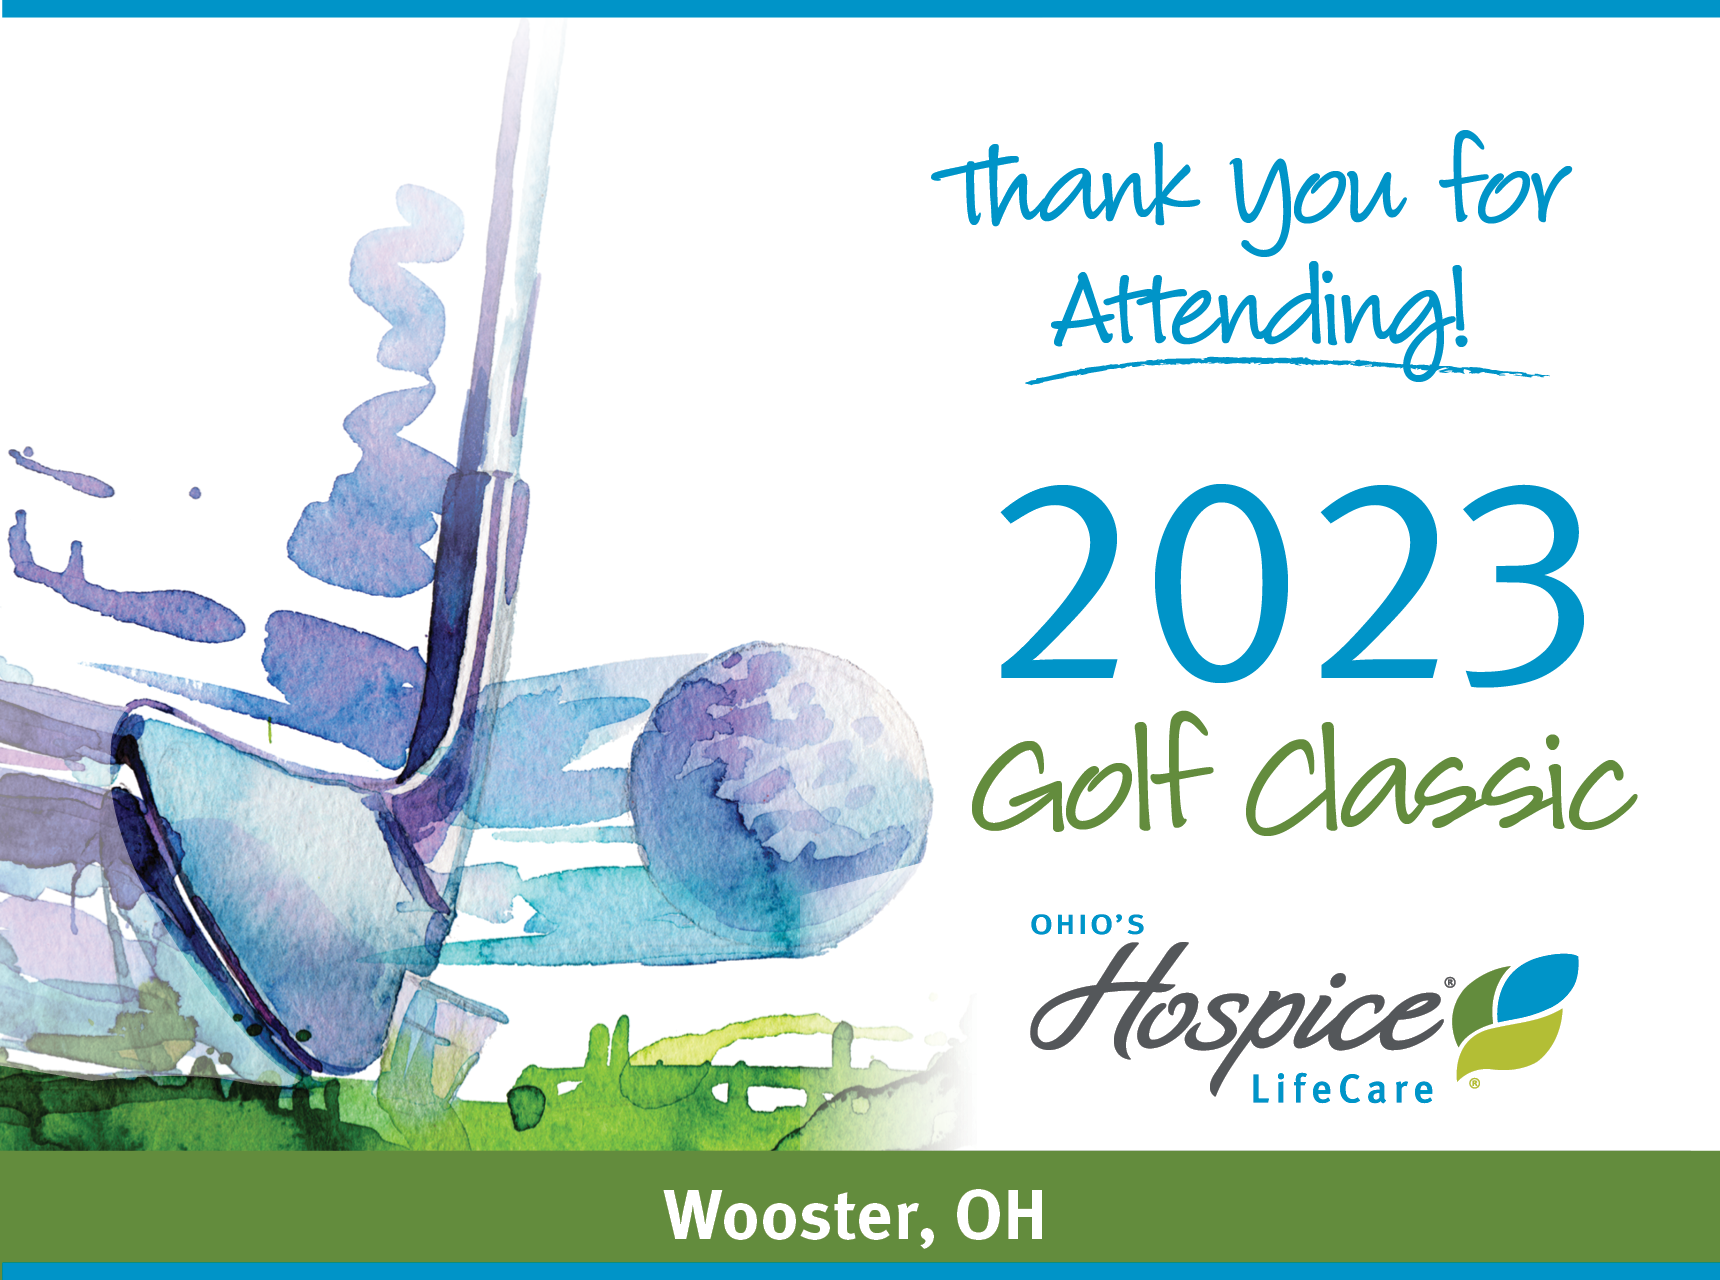 Thank you for attending! 2023 Golf Classic. Ohio's Hospice LifeCare